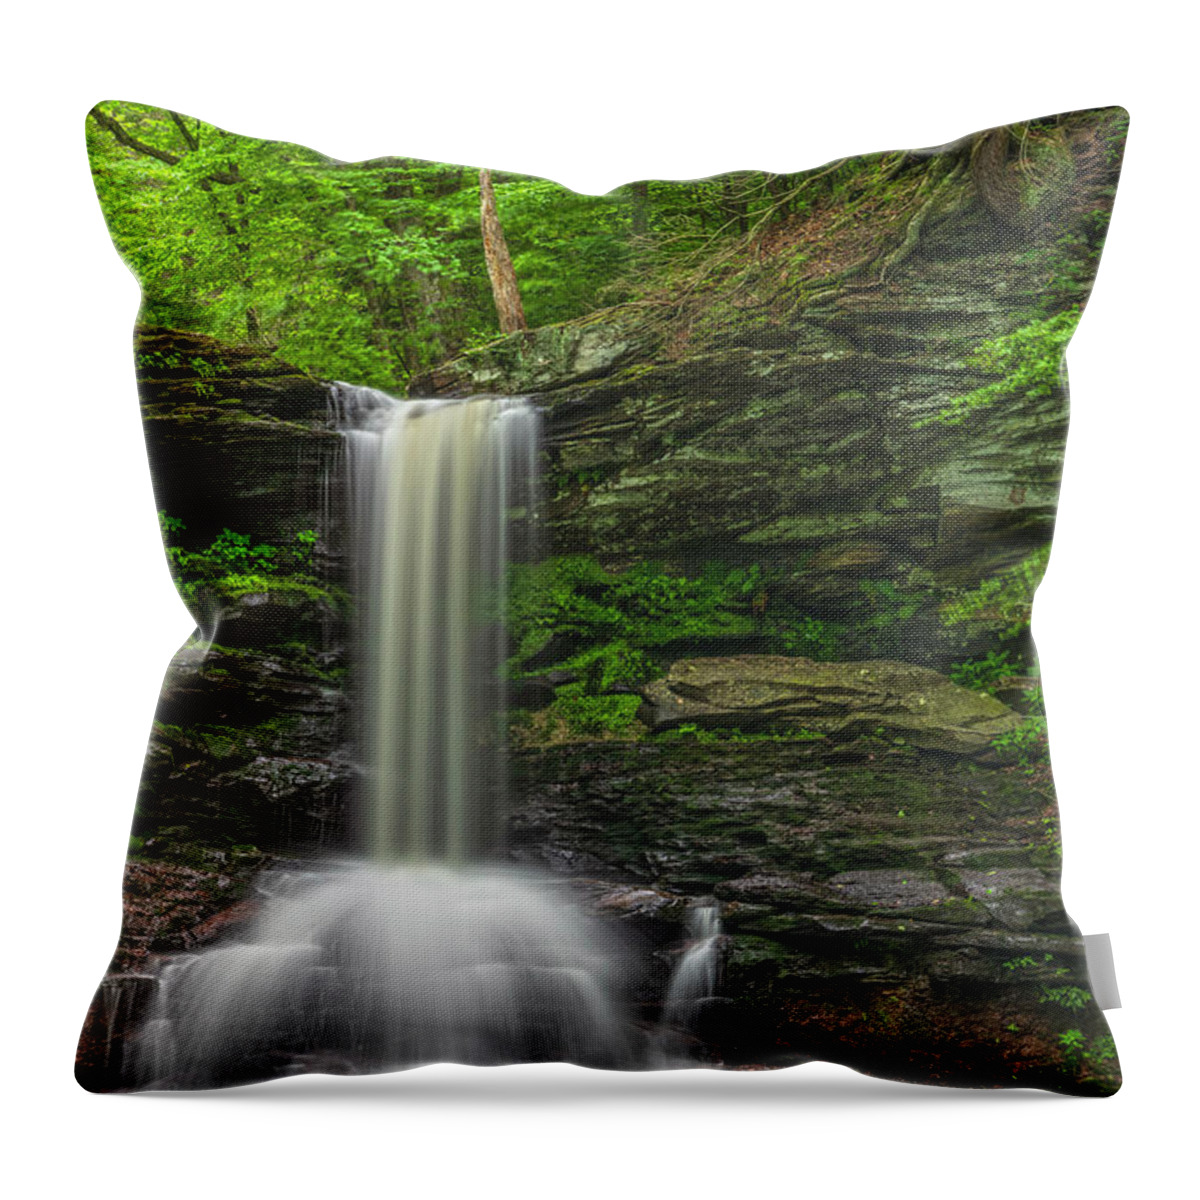 Ricketts Glen State Park Throw Pillow featuring the photograph Sheldon Falls In Early Morning Light by Angelo Marcialis